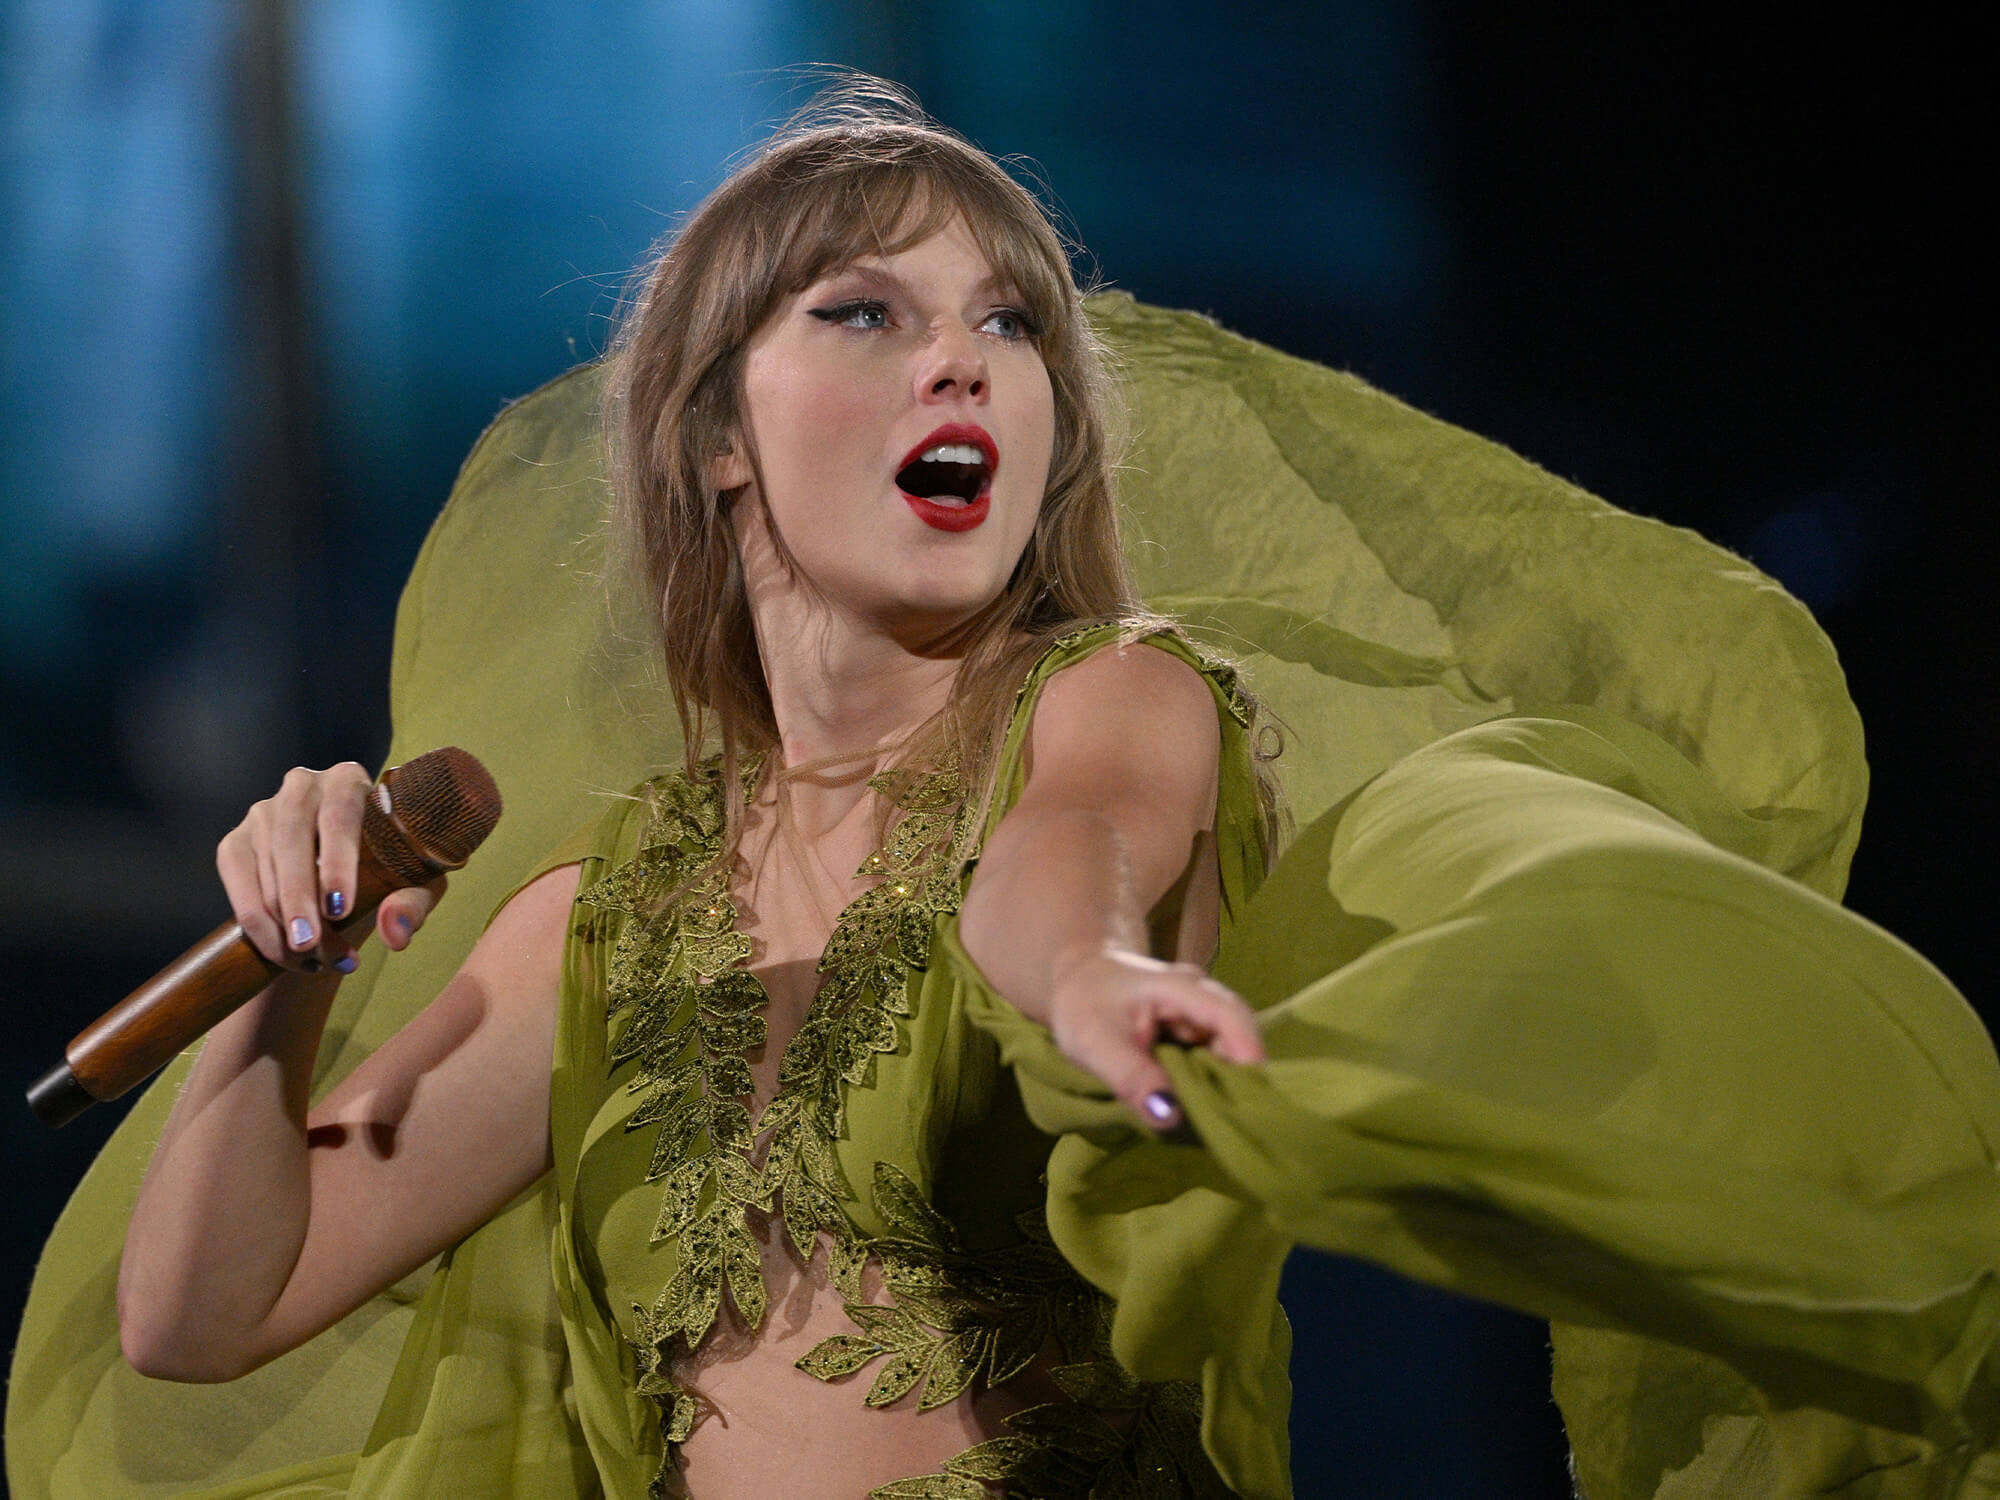 Taylor Swift on stage. She is holding a brown microphone in one hand, and holds the trail of her long green dress in the other. She is looking out into the audience.